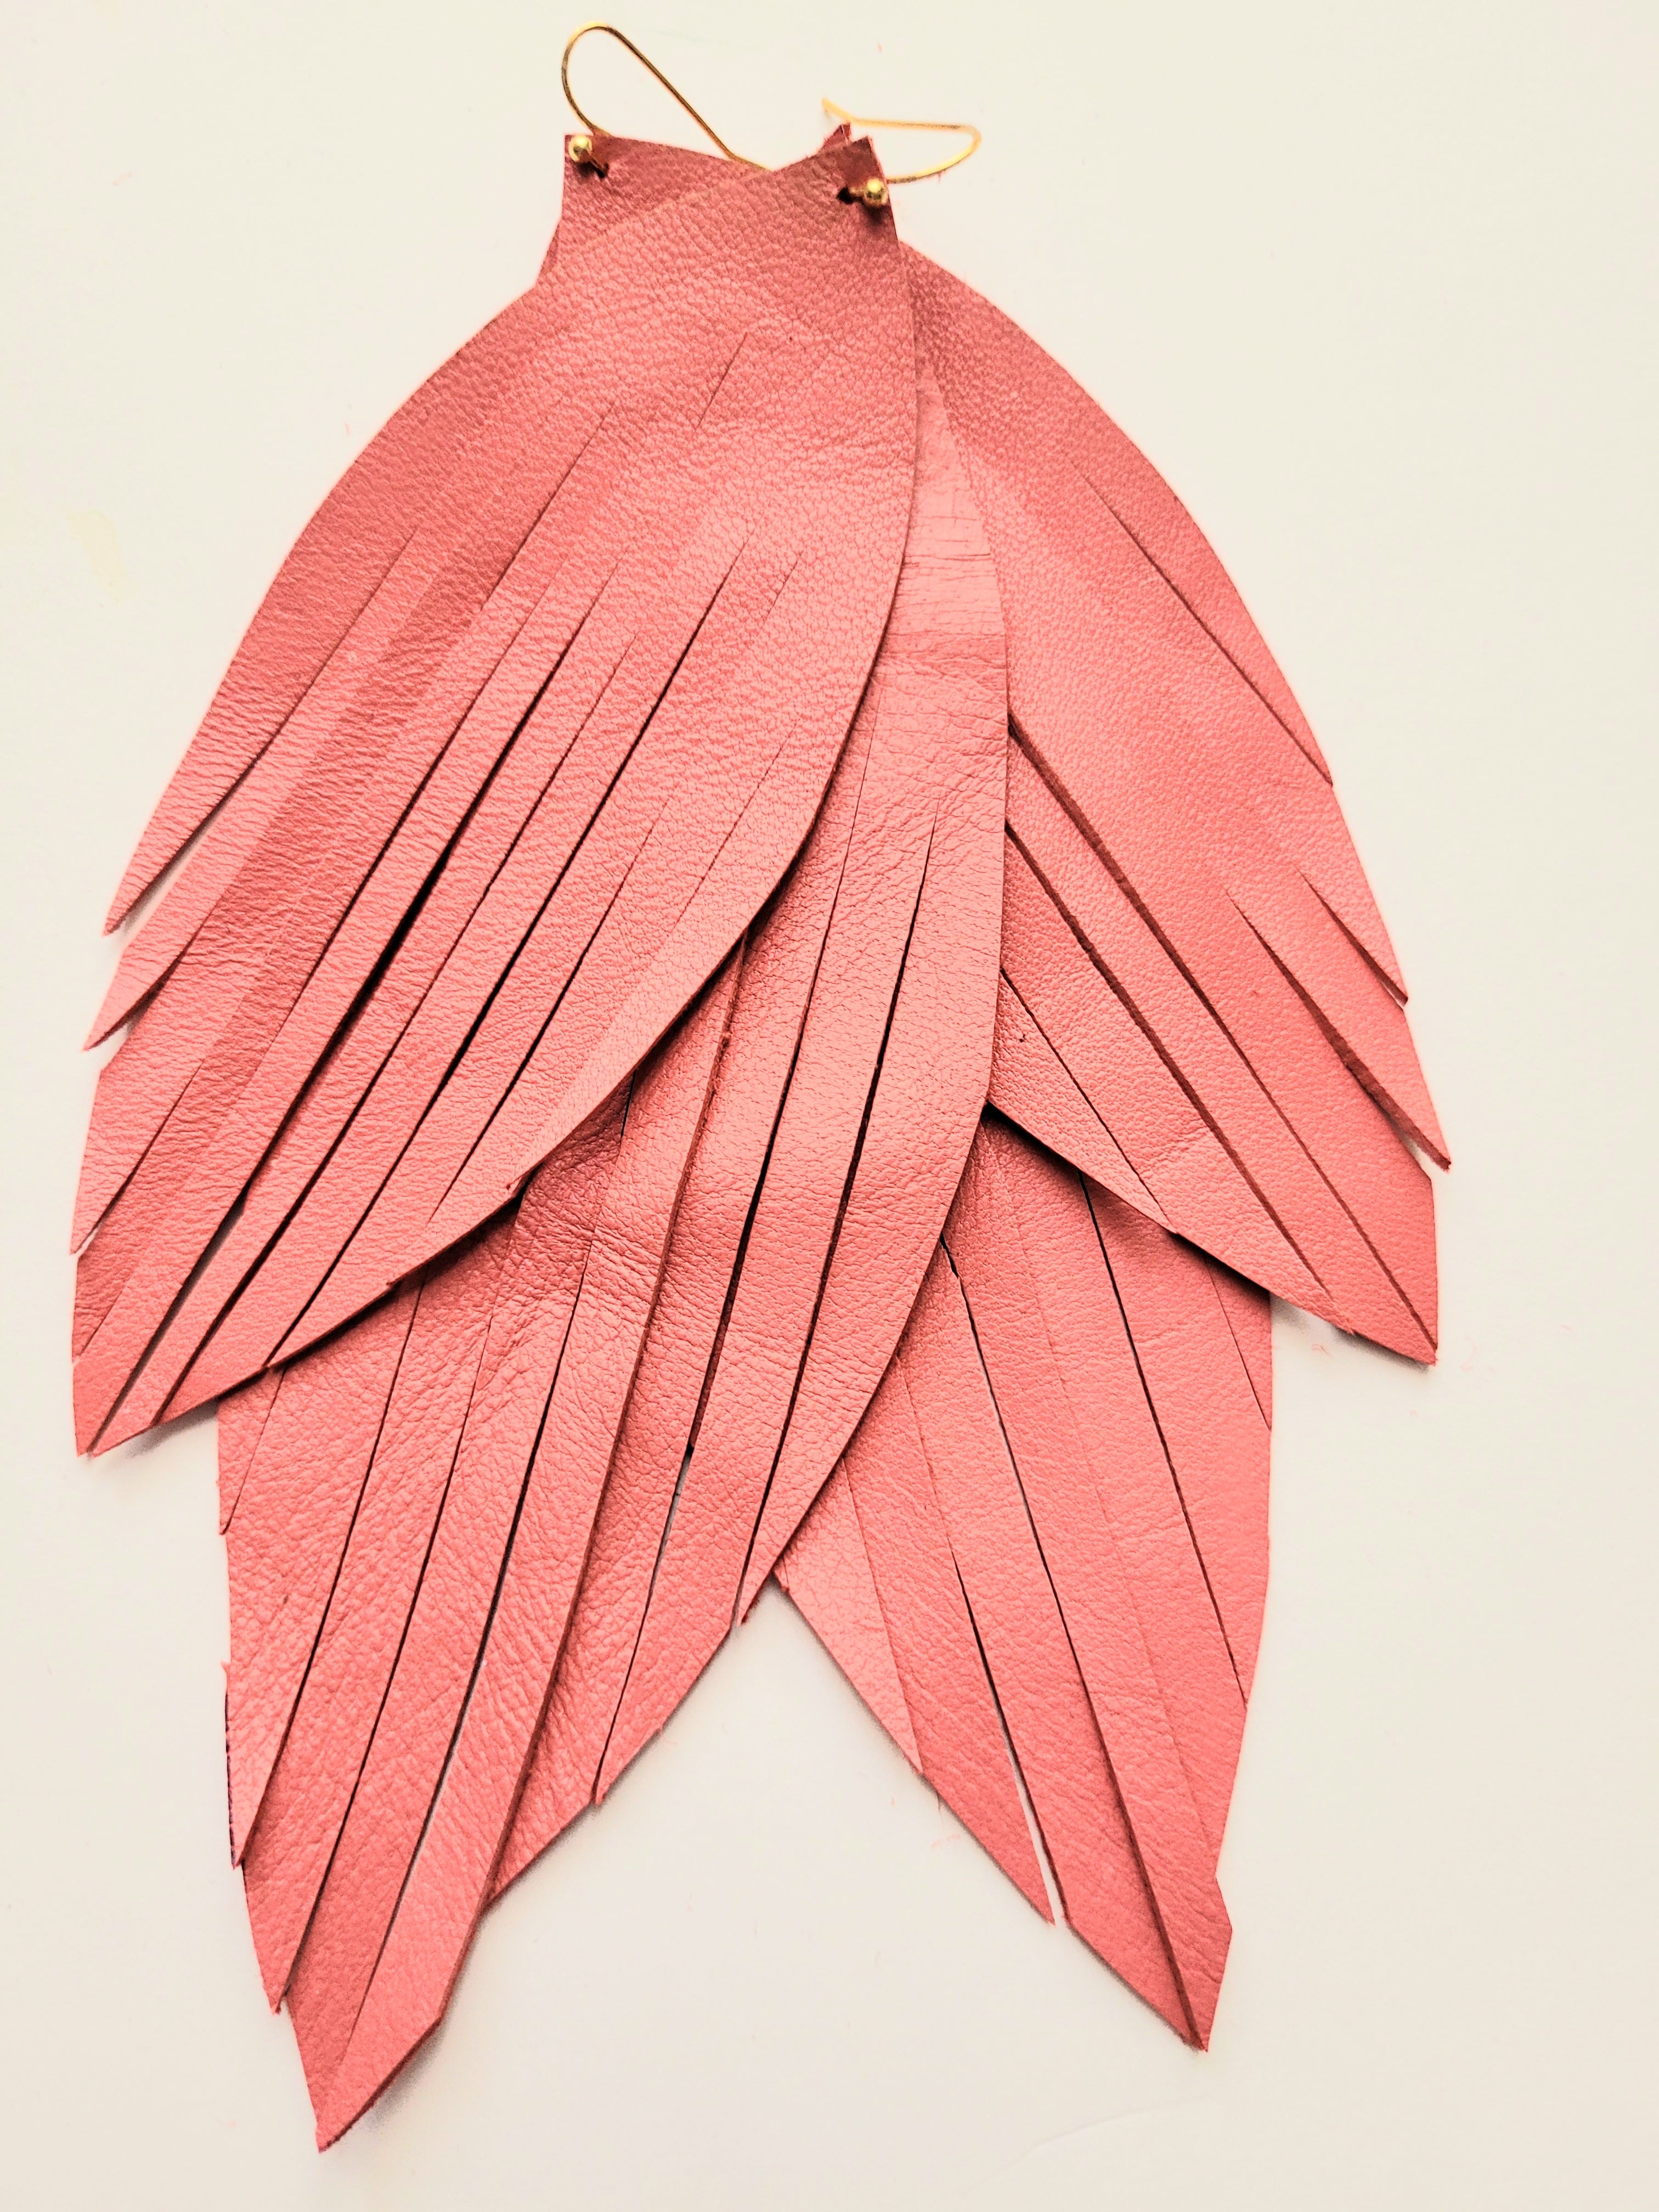 Double-layered 'Georgia Peach' Leather Feather Earrings